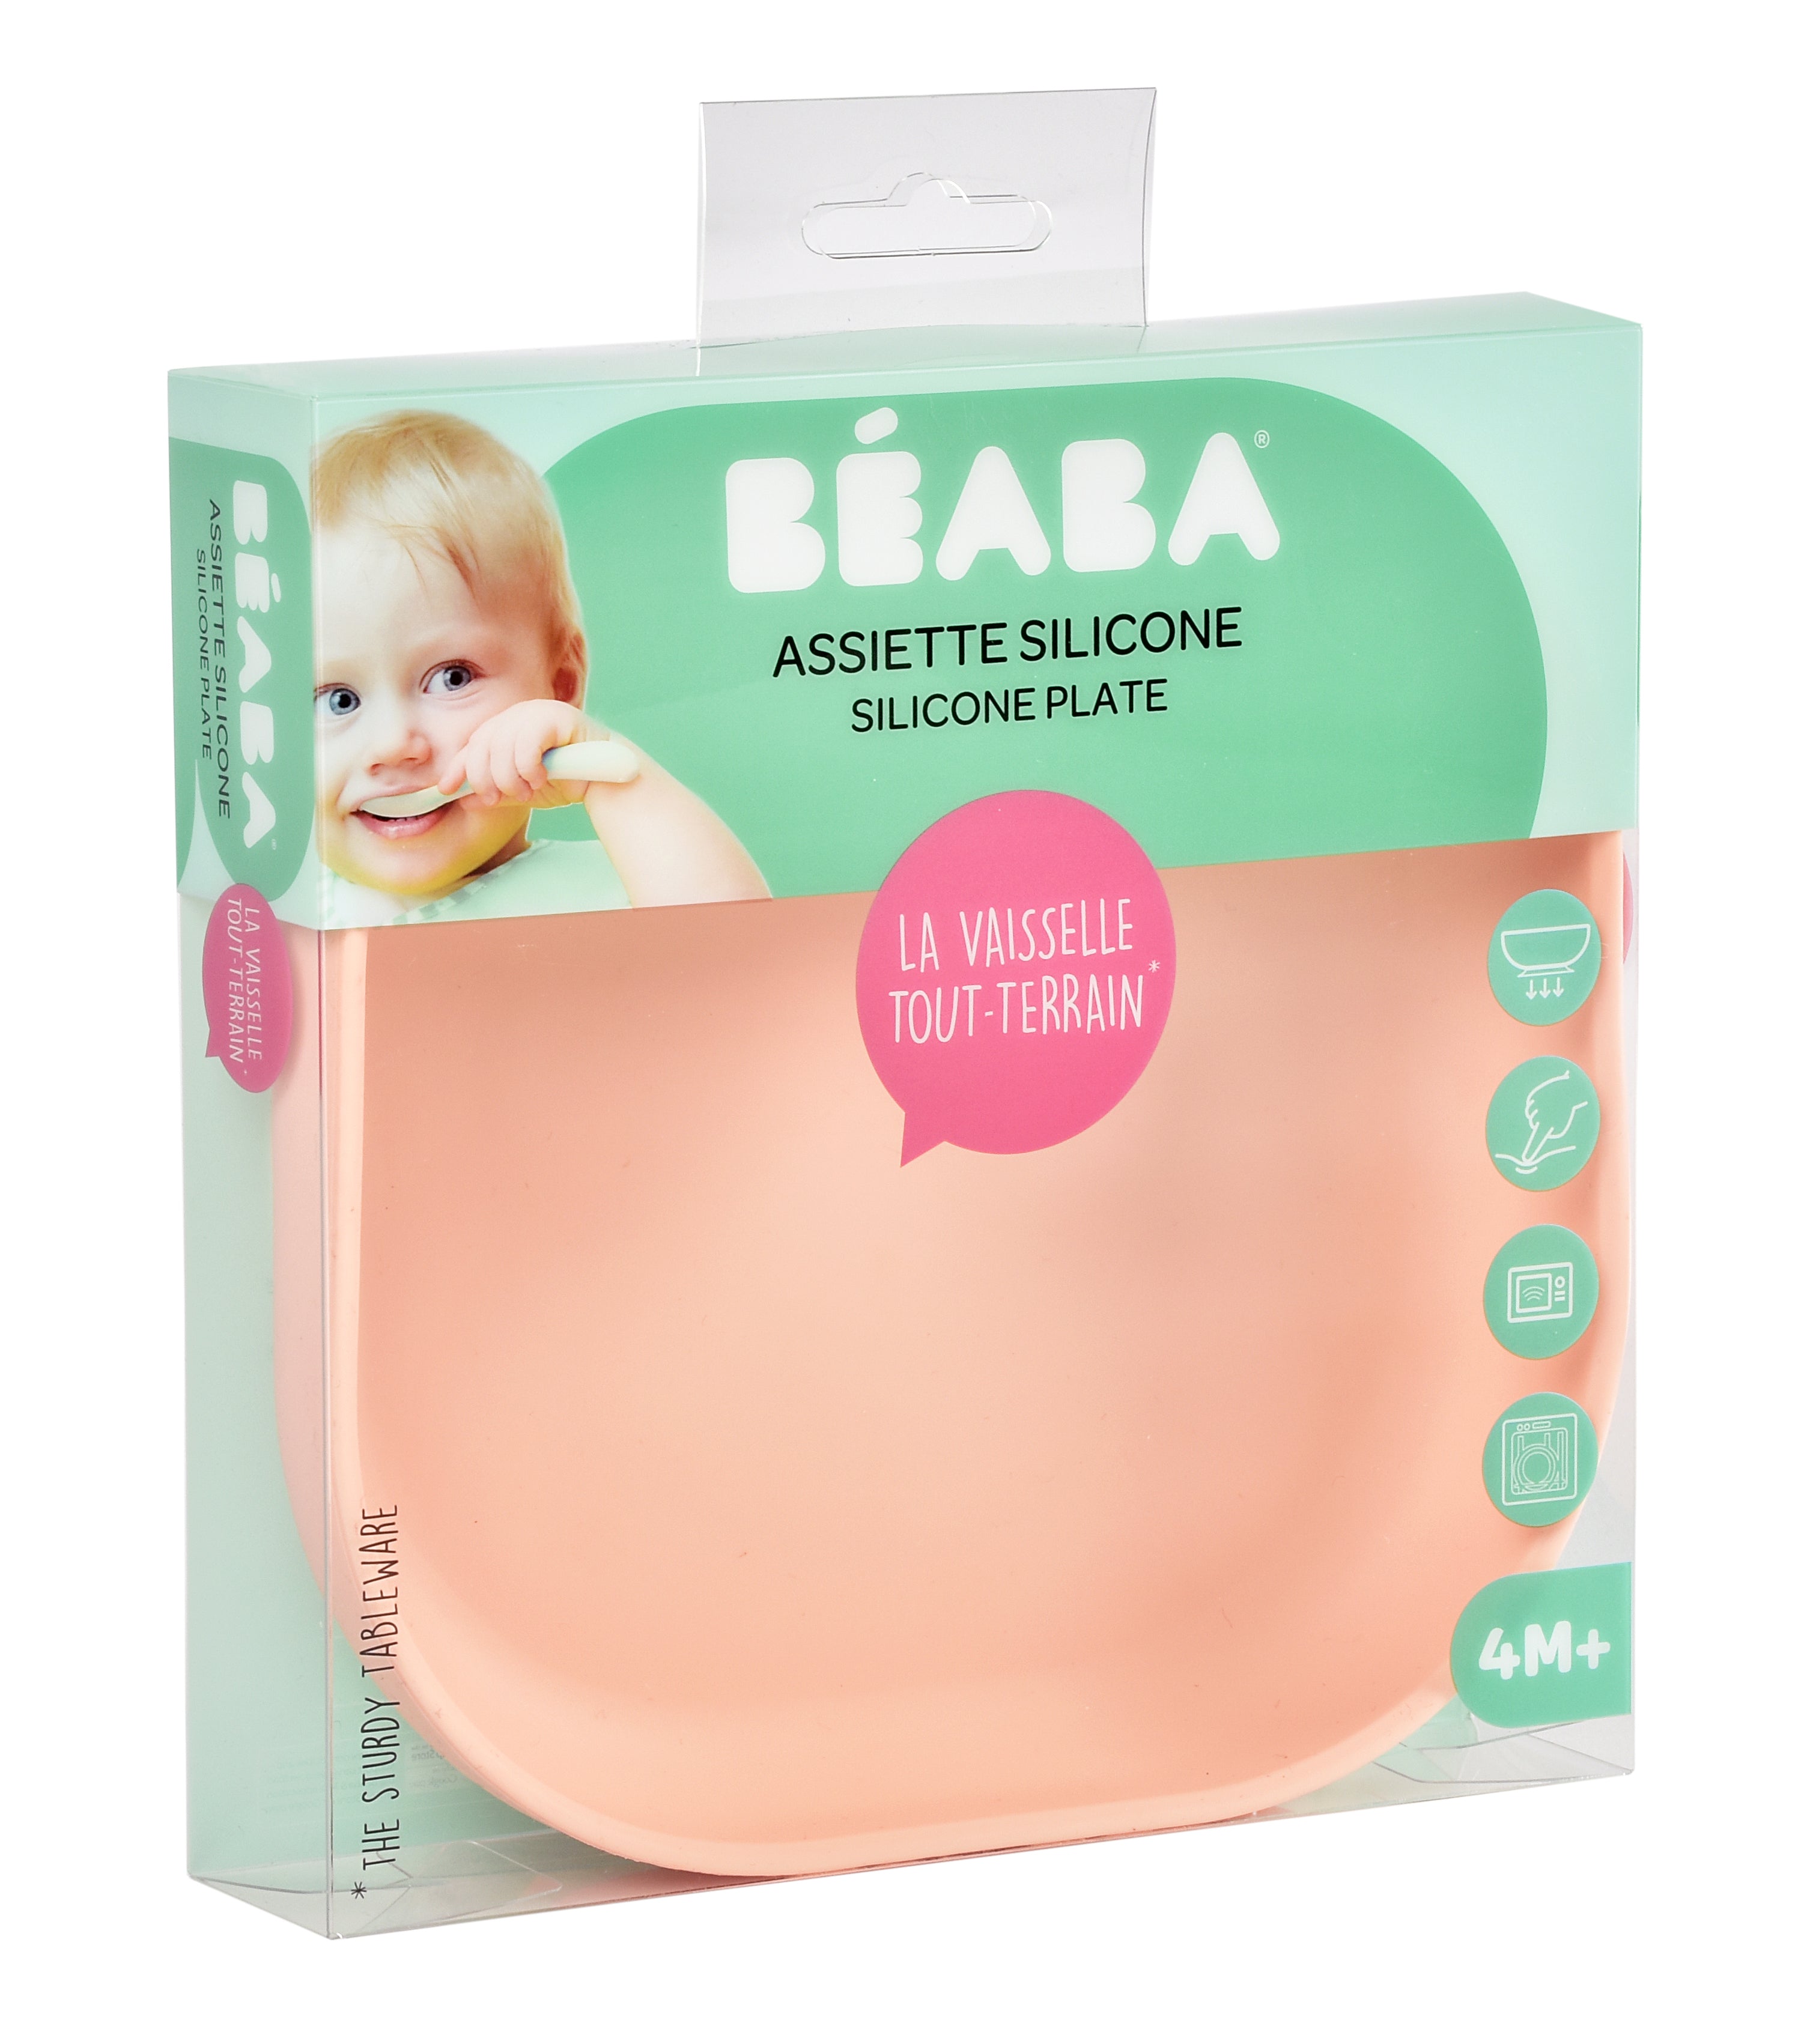 BEABA SILICONE SUCTION PLATE